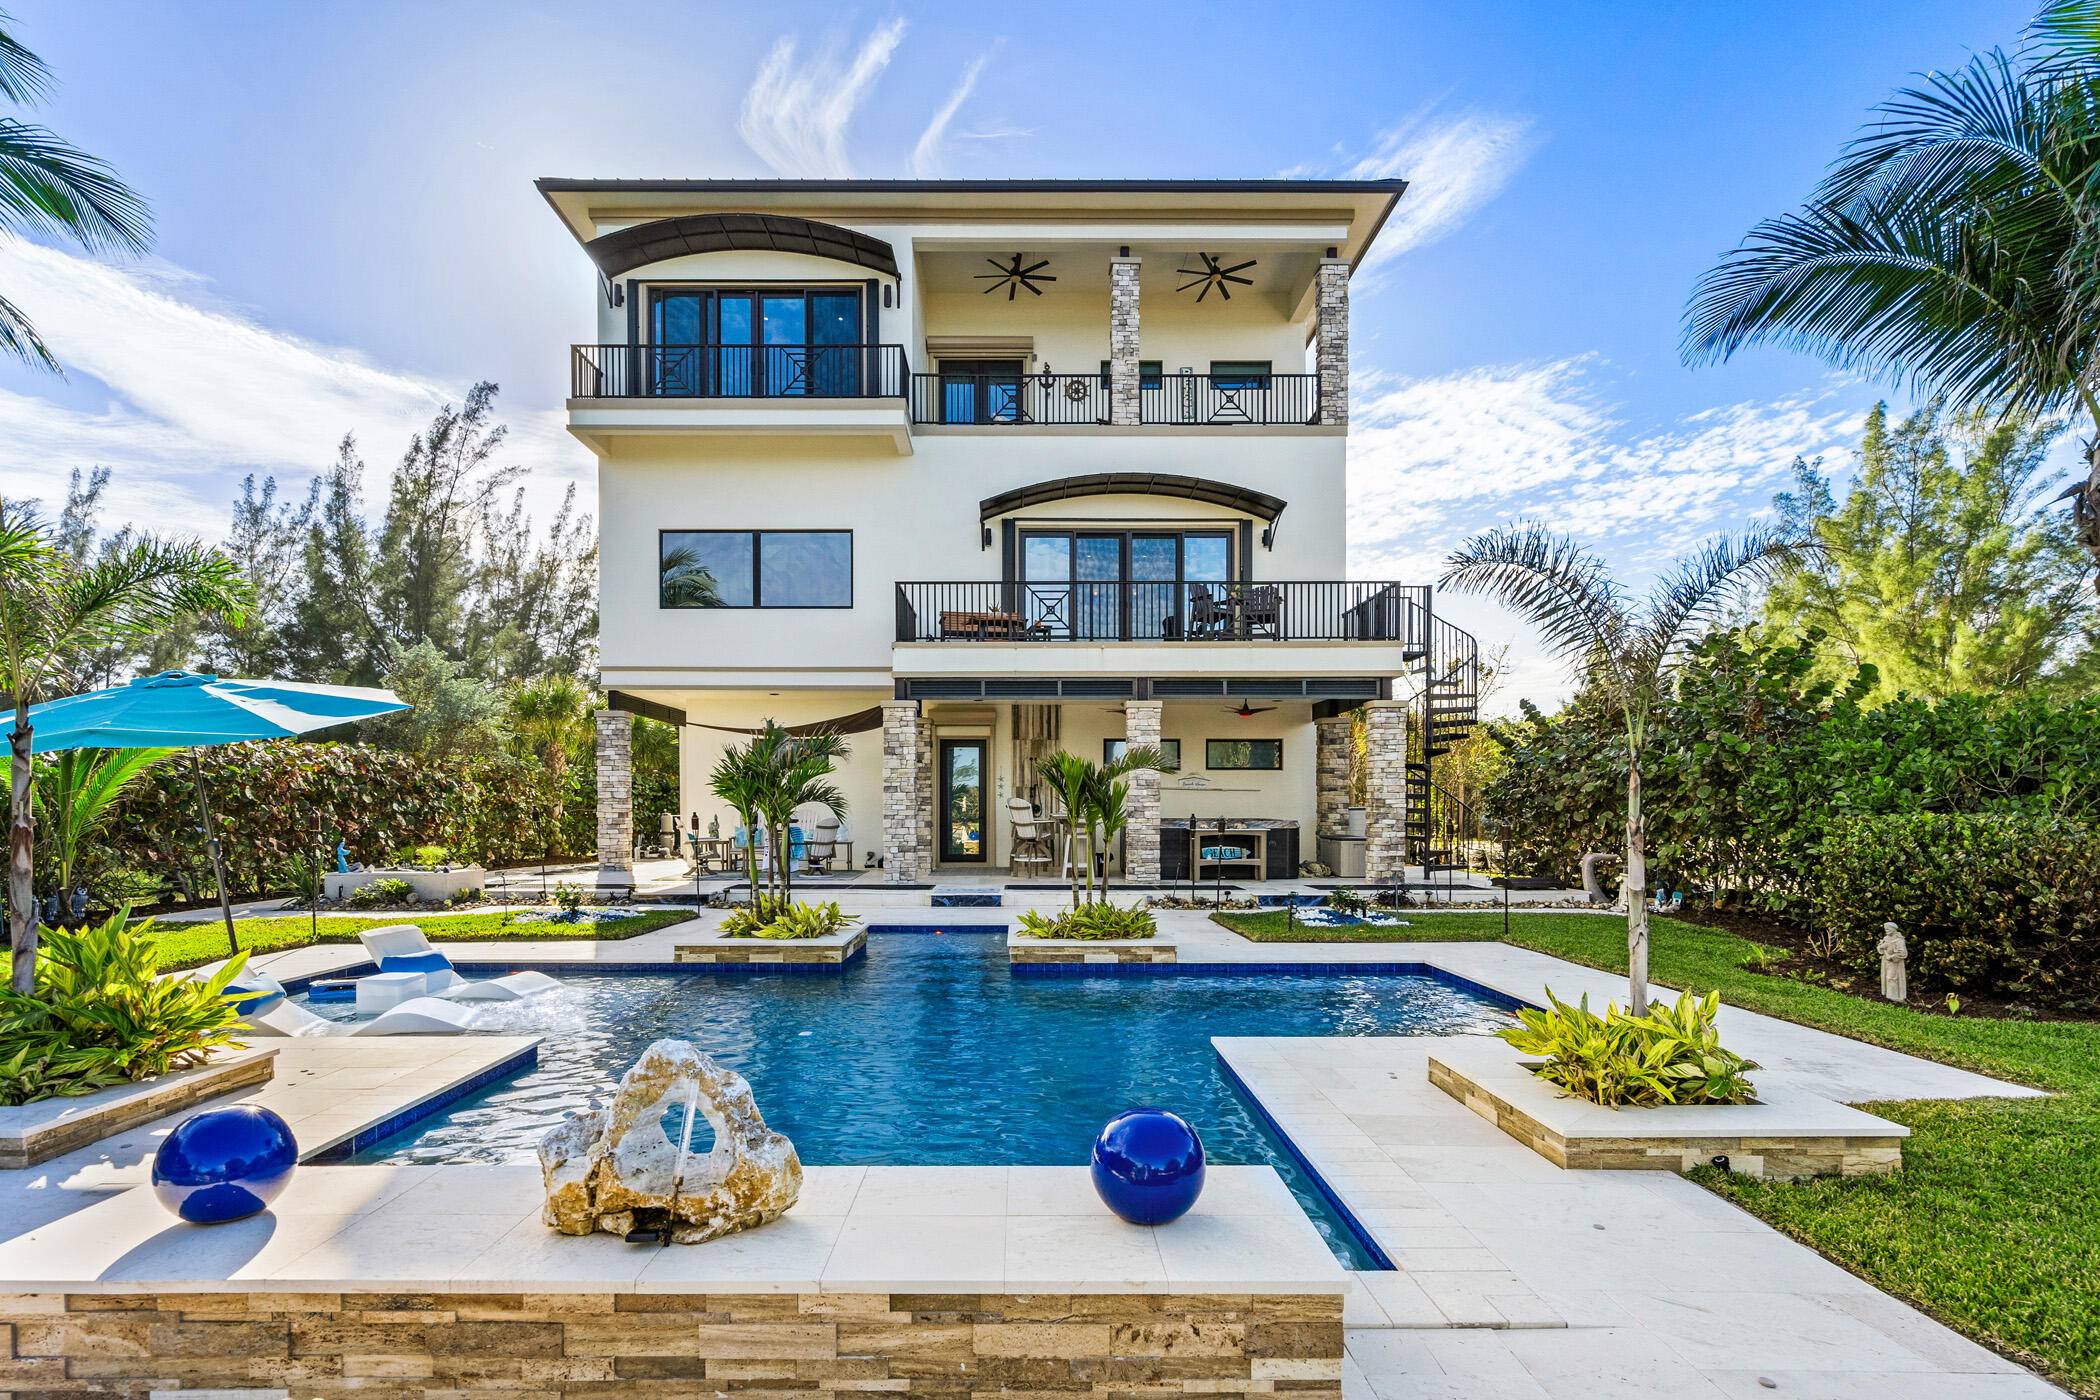 Modern oceanfront estate perfectly infuses luxury coastal living in exclusive 10 home enclave set far back from A1a for complete privacy.